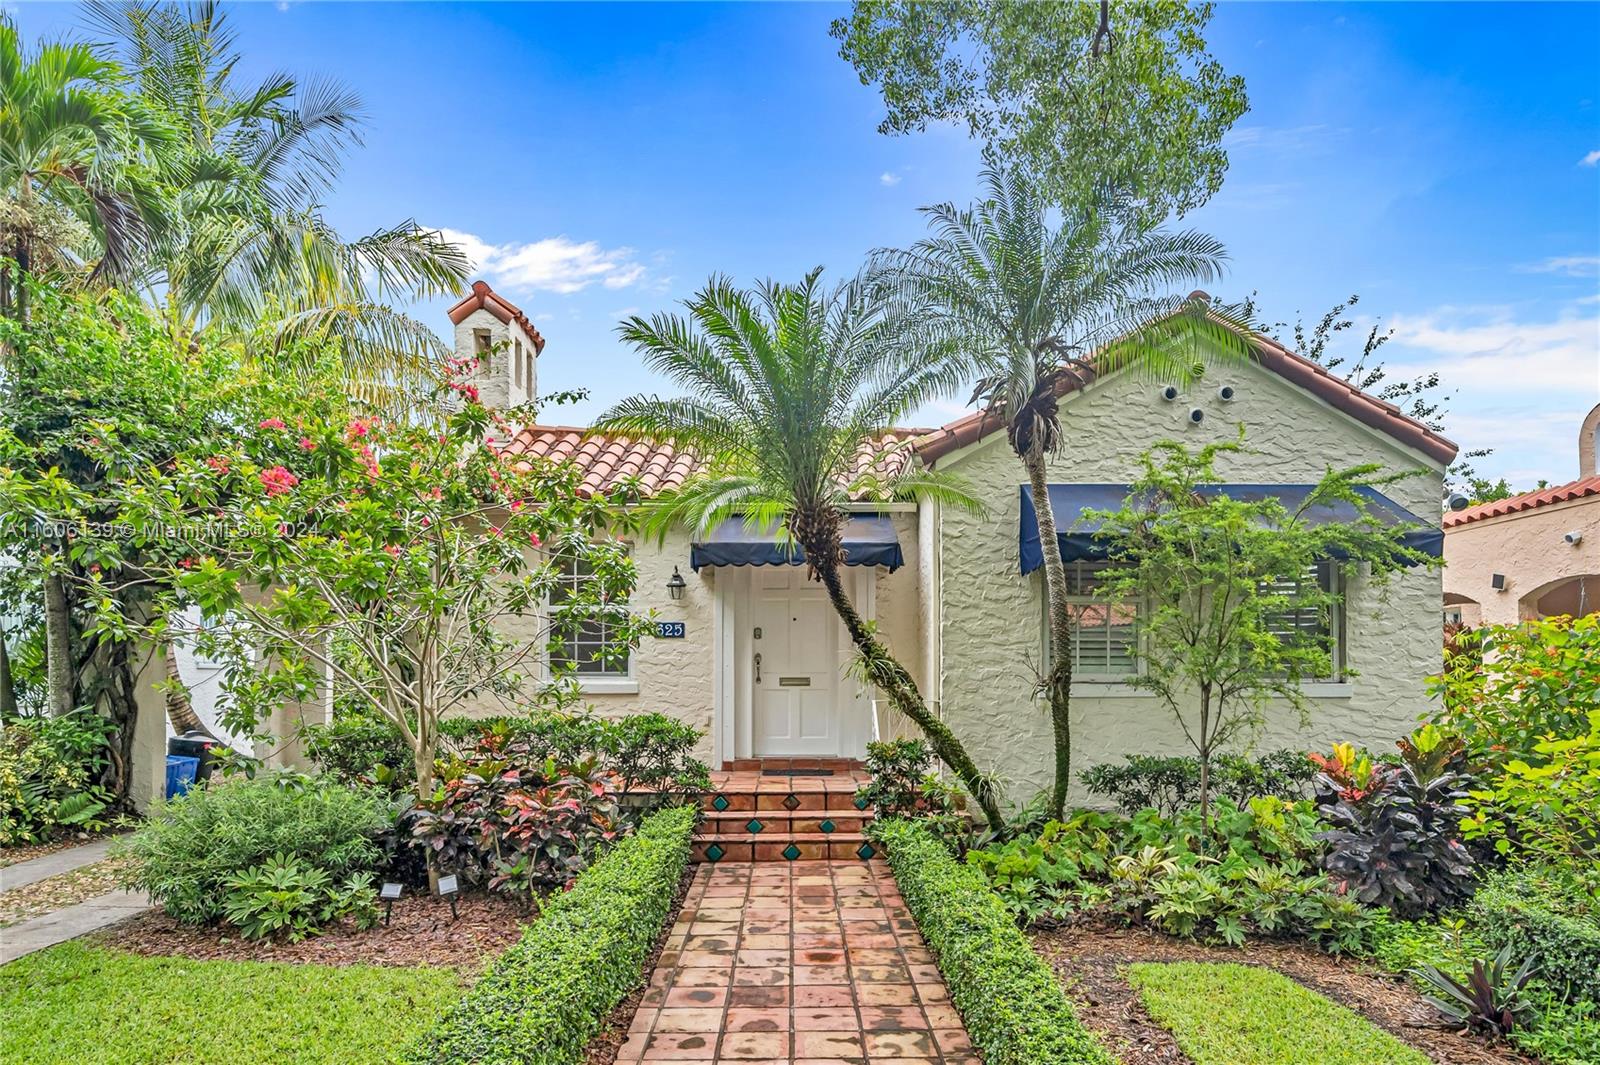 Welcome to this quintessential 1925 Old Spanish gem nestled on a tree-lined street in Coral Gables. This beautiful home seamlessly blends timeless charm w/ modern updates. Full of character w/ an original fireplace, hardwood floors & abundant natural light. The main house offers 2 spacious bedrooms & 2 full baths. Detached 1/1 cottage serves as perfect home office or guest quarters. Enjoy a renovated kitchen w/ ample storage & breakfast nook. Primary suite w/ walk-in closet & large bathroom. Tropical backyard oasis w/ deck, private patio & lush landscaping, ideal for relaxation & entertaining. Upgrades include impact windows, recessed lighting & new water heater. A carport ensures convenient parking. Ideal location just 2 blocks from Granada Golf Course & walking distance to Miracle Mile.